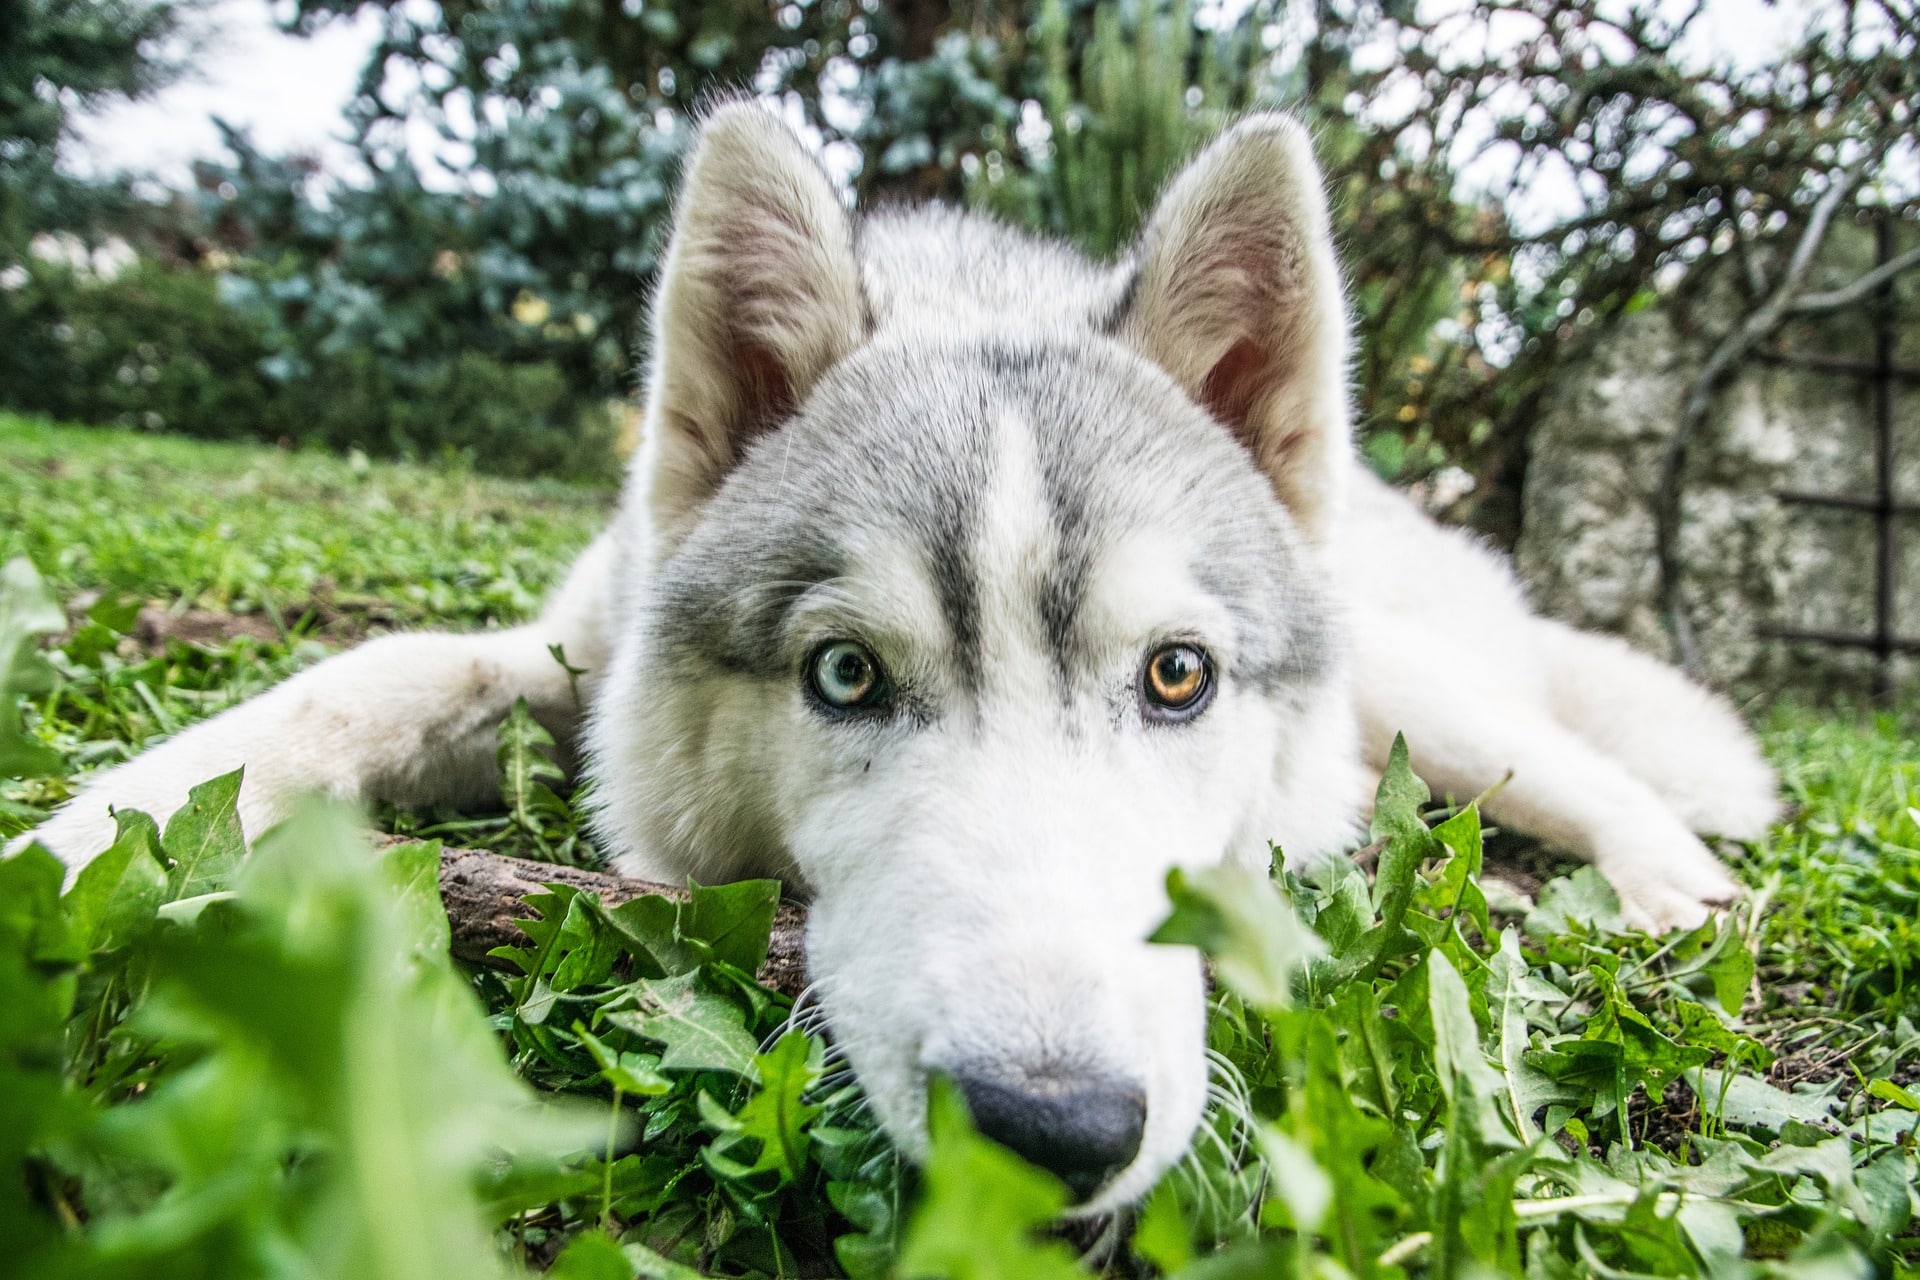 A white and grey Siberian husky laying on grass.